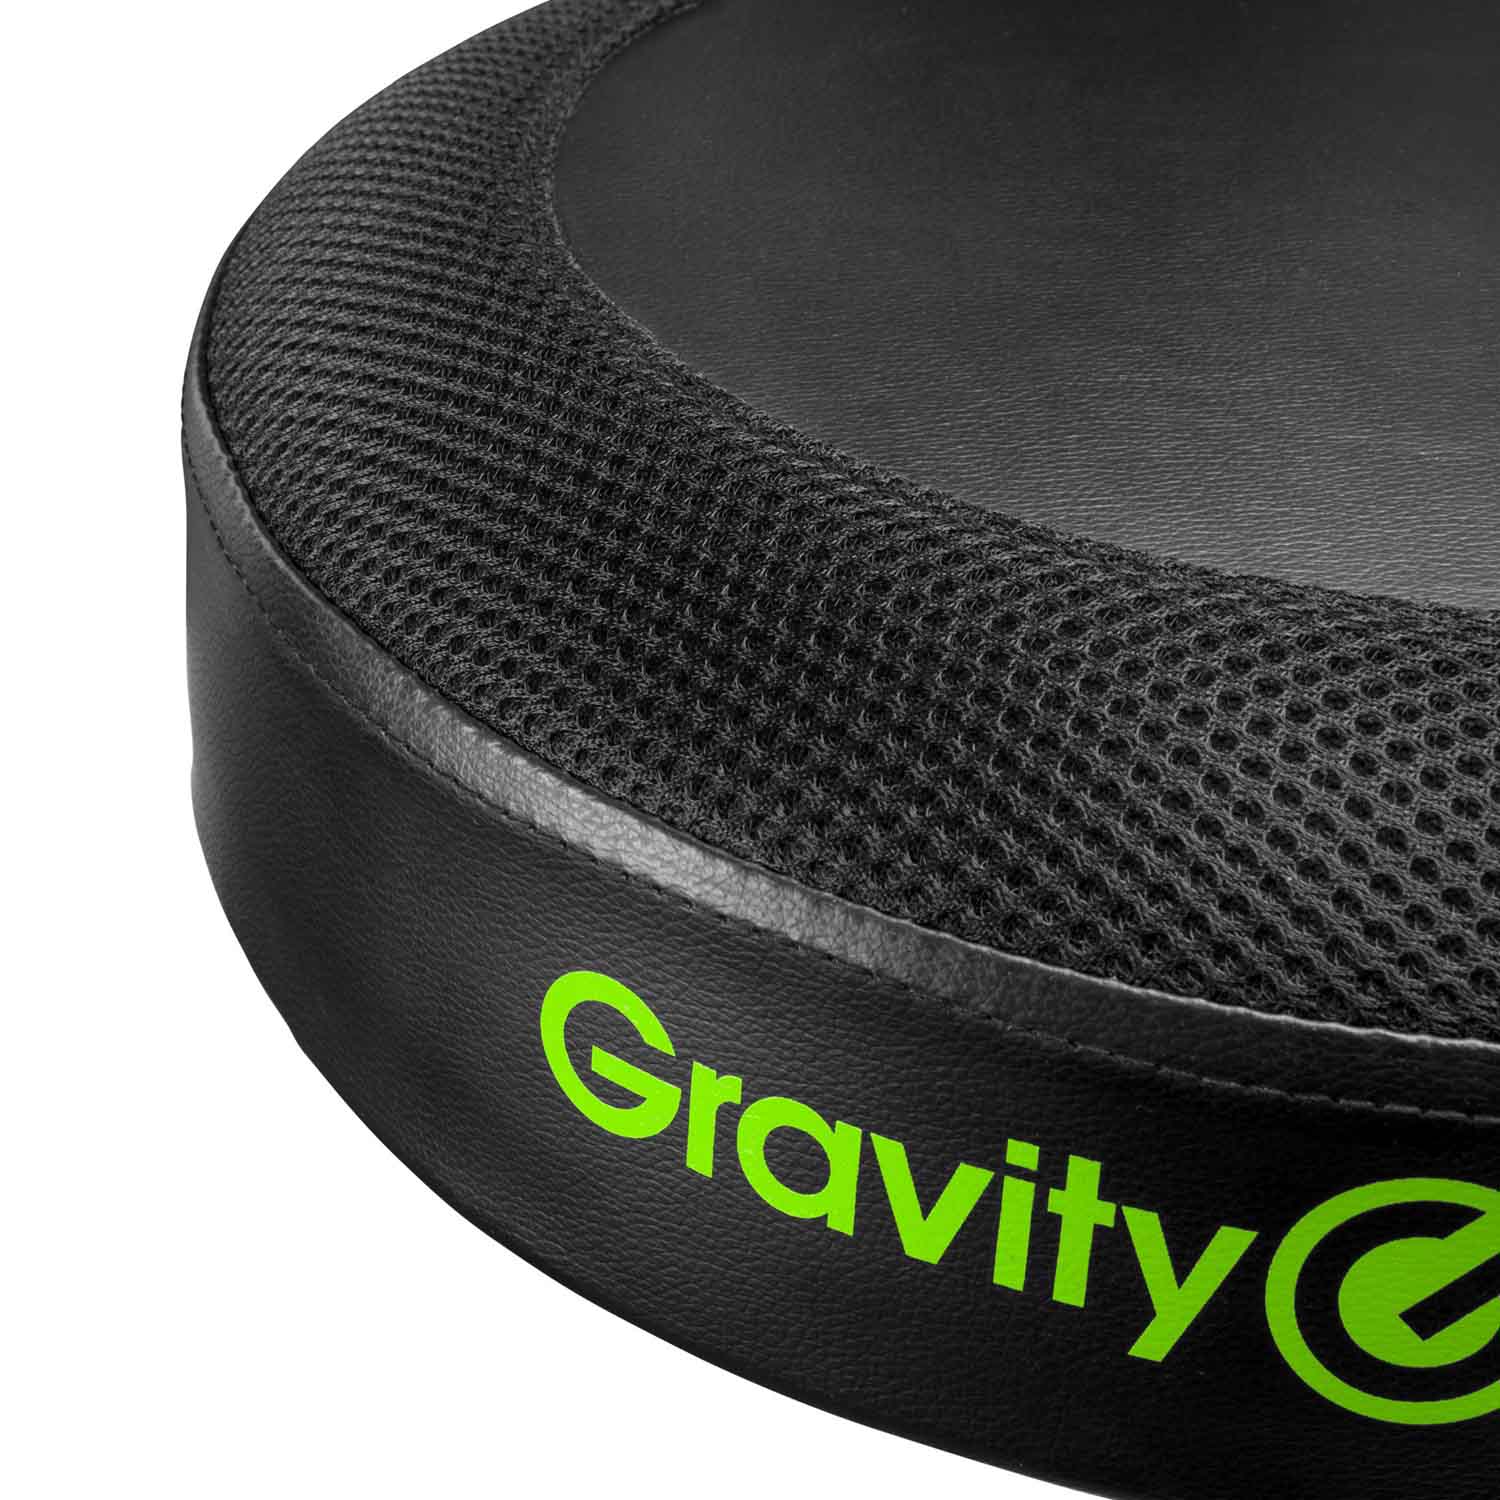 Gravity GFDSEAT1 Round Musicians Stool Foldable, Adjustable Height - Hollywood DJ